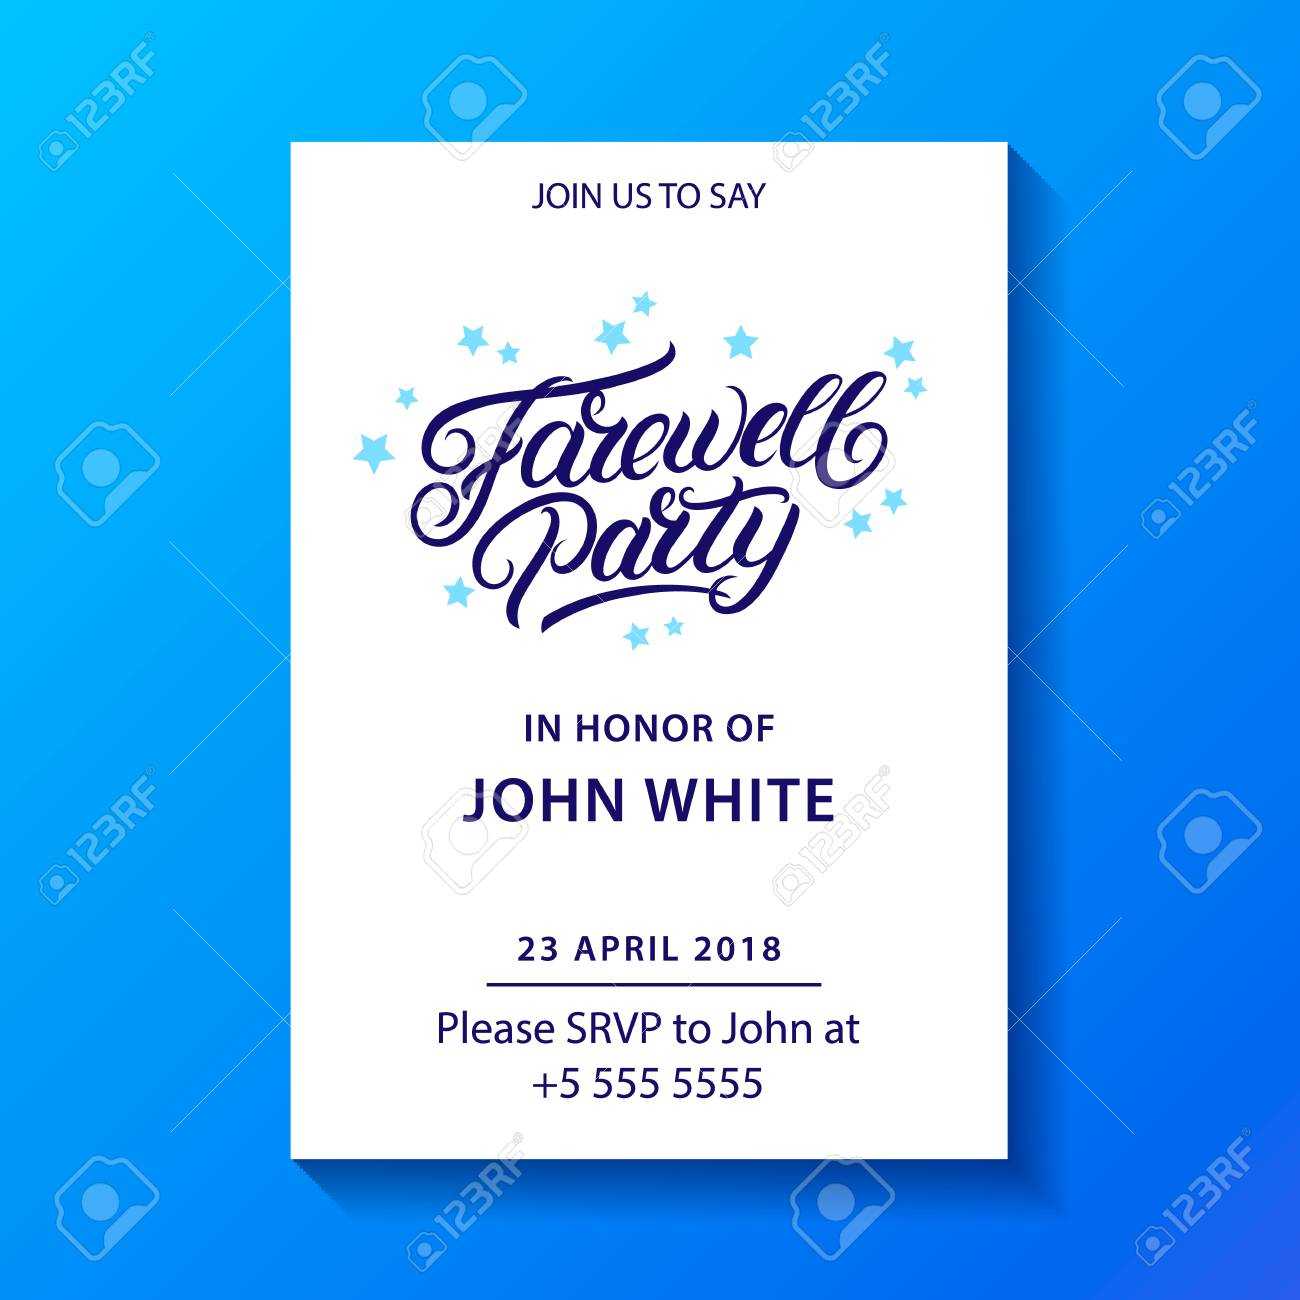 Farewell Party Hand Written Lettering. Invitation Card, Poster,.. Regarding Goodbye Card Template